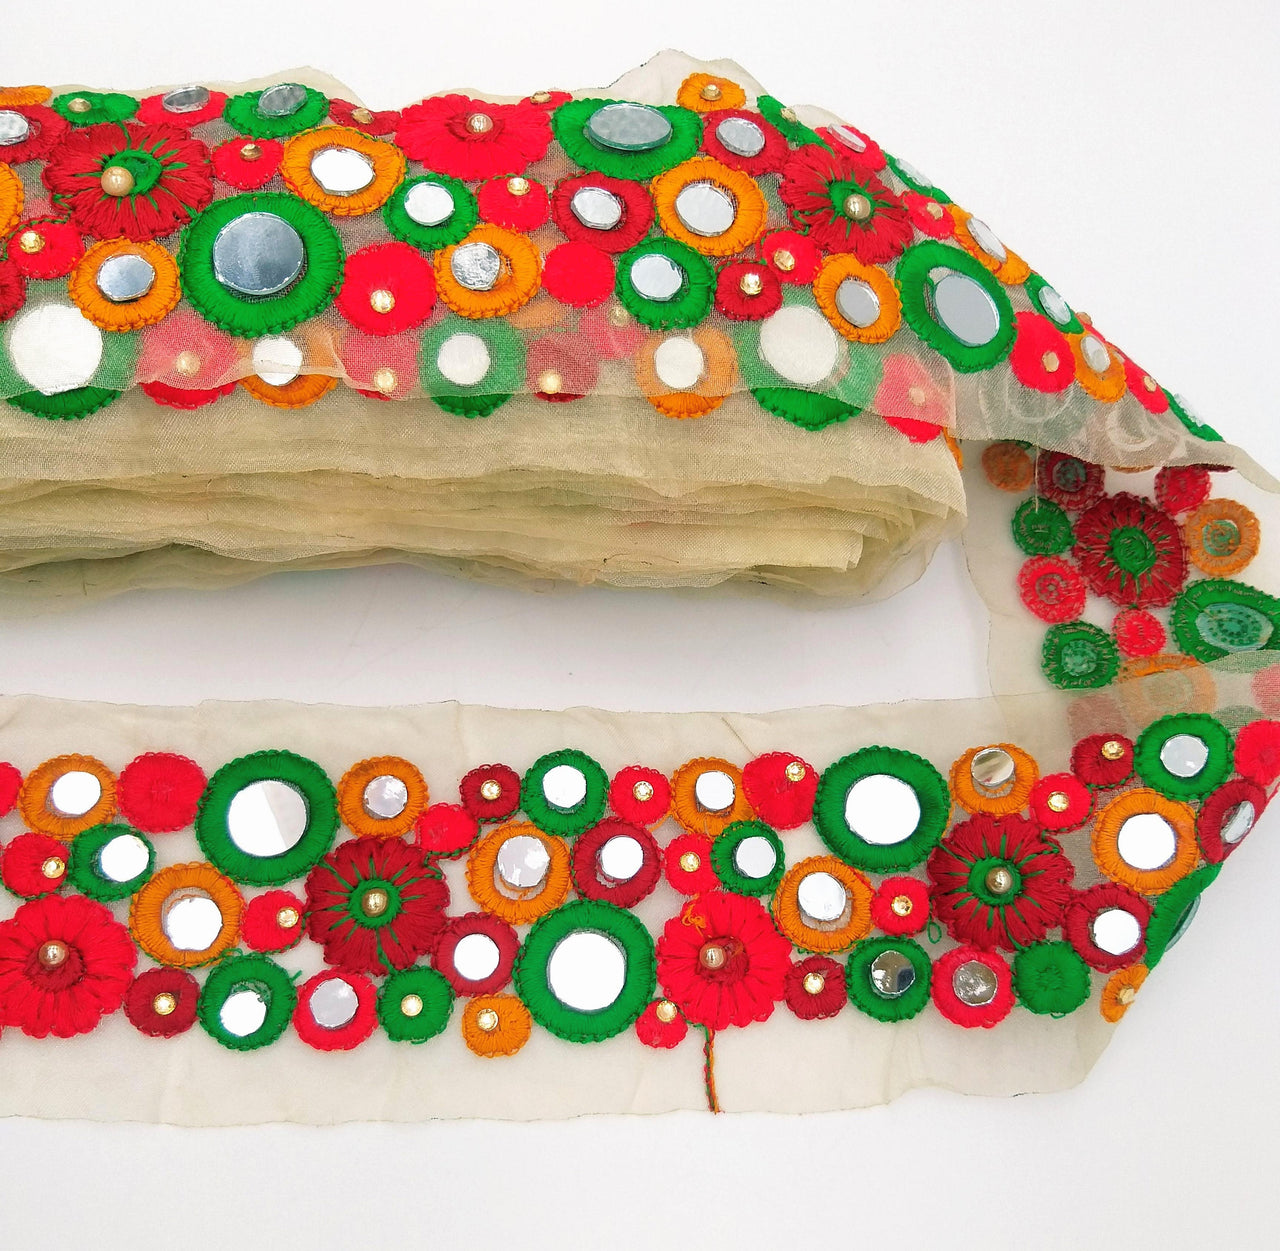 Gold Sheer Tissue Fabric Trim With Red And Green Circles and Floral Embroidery With Mirror Embellishments, Indian Mirrored Trim